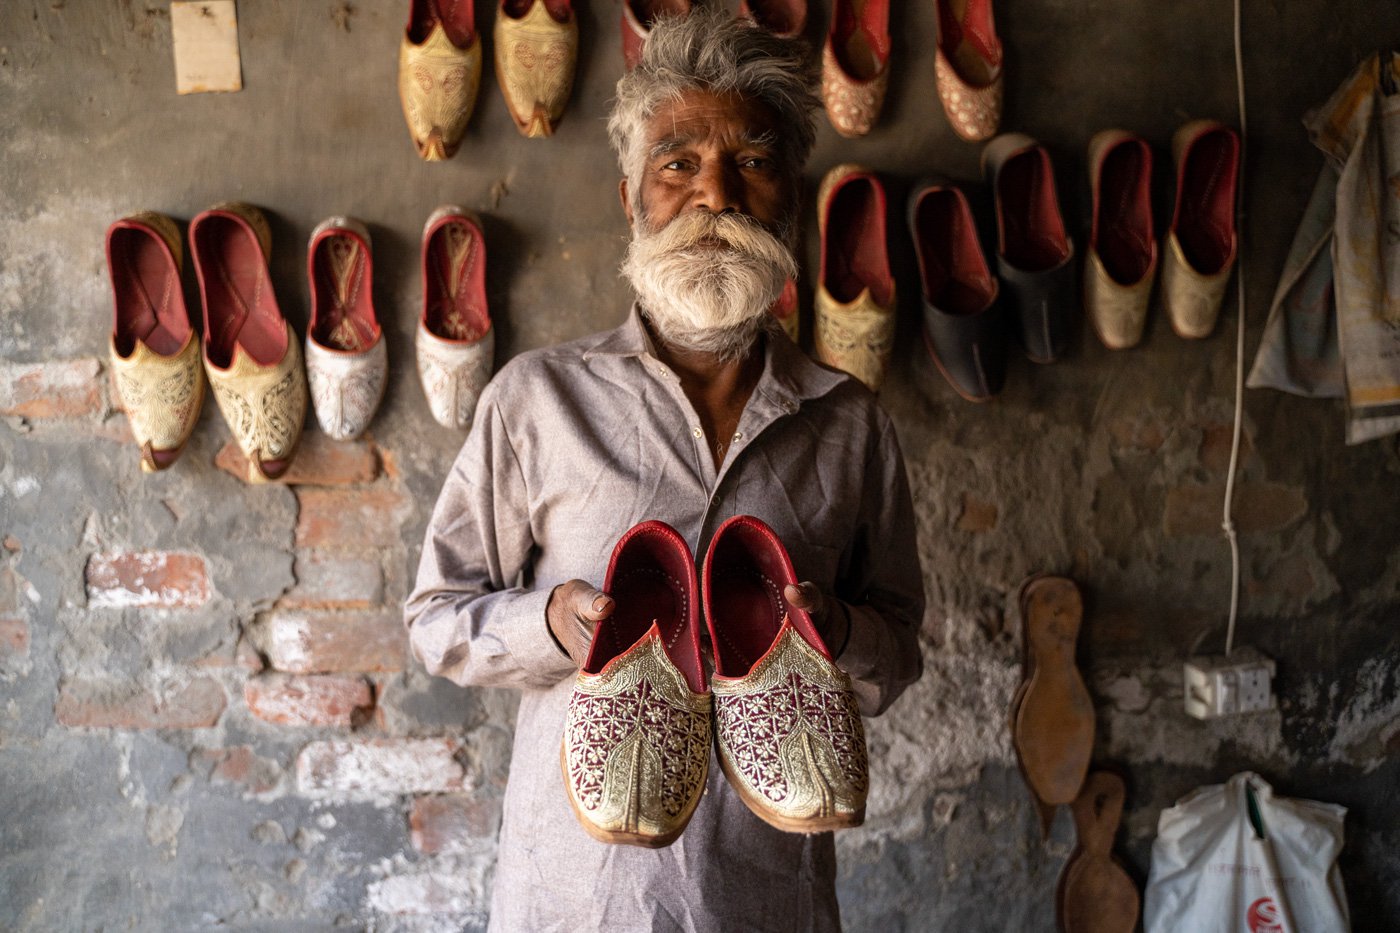 Hans Raj’s juttis have travelled across India with their customers. These are back in vogue after a gap of about 15 years. Now, ‘every day feels like Diwali for me,’ a joyous Hans Raj says.